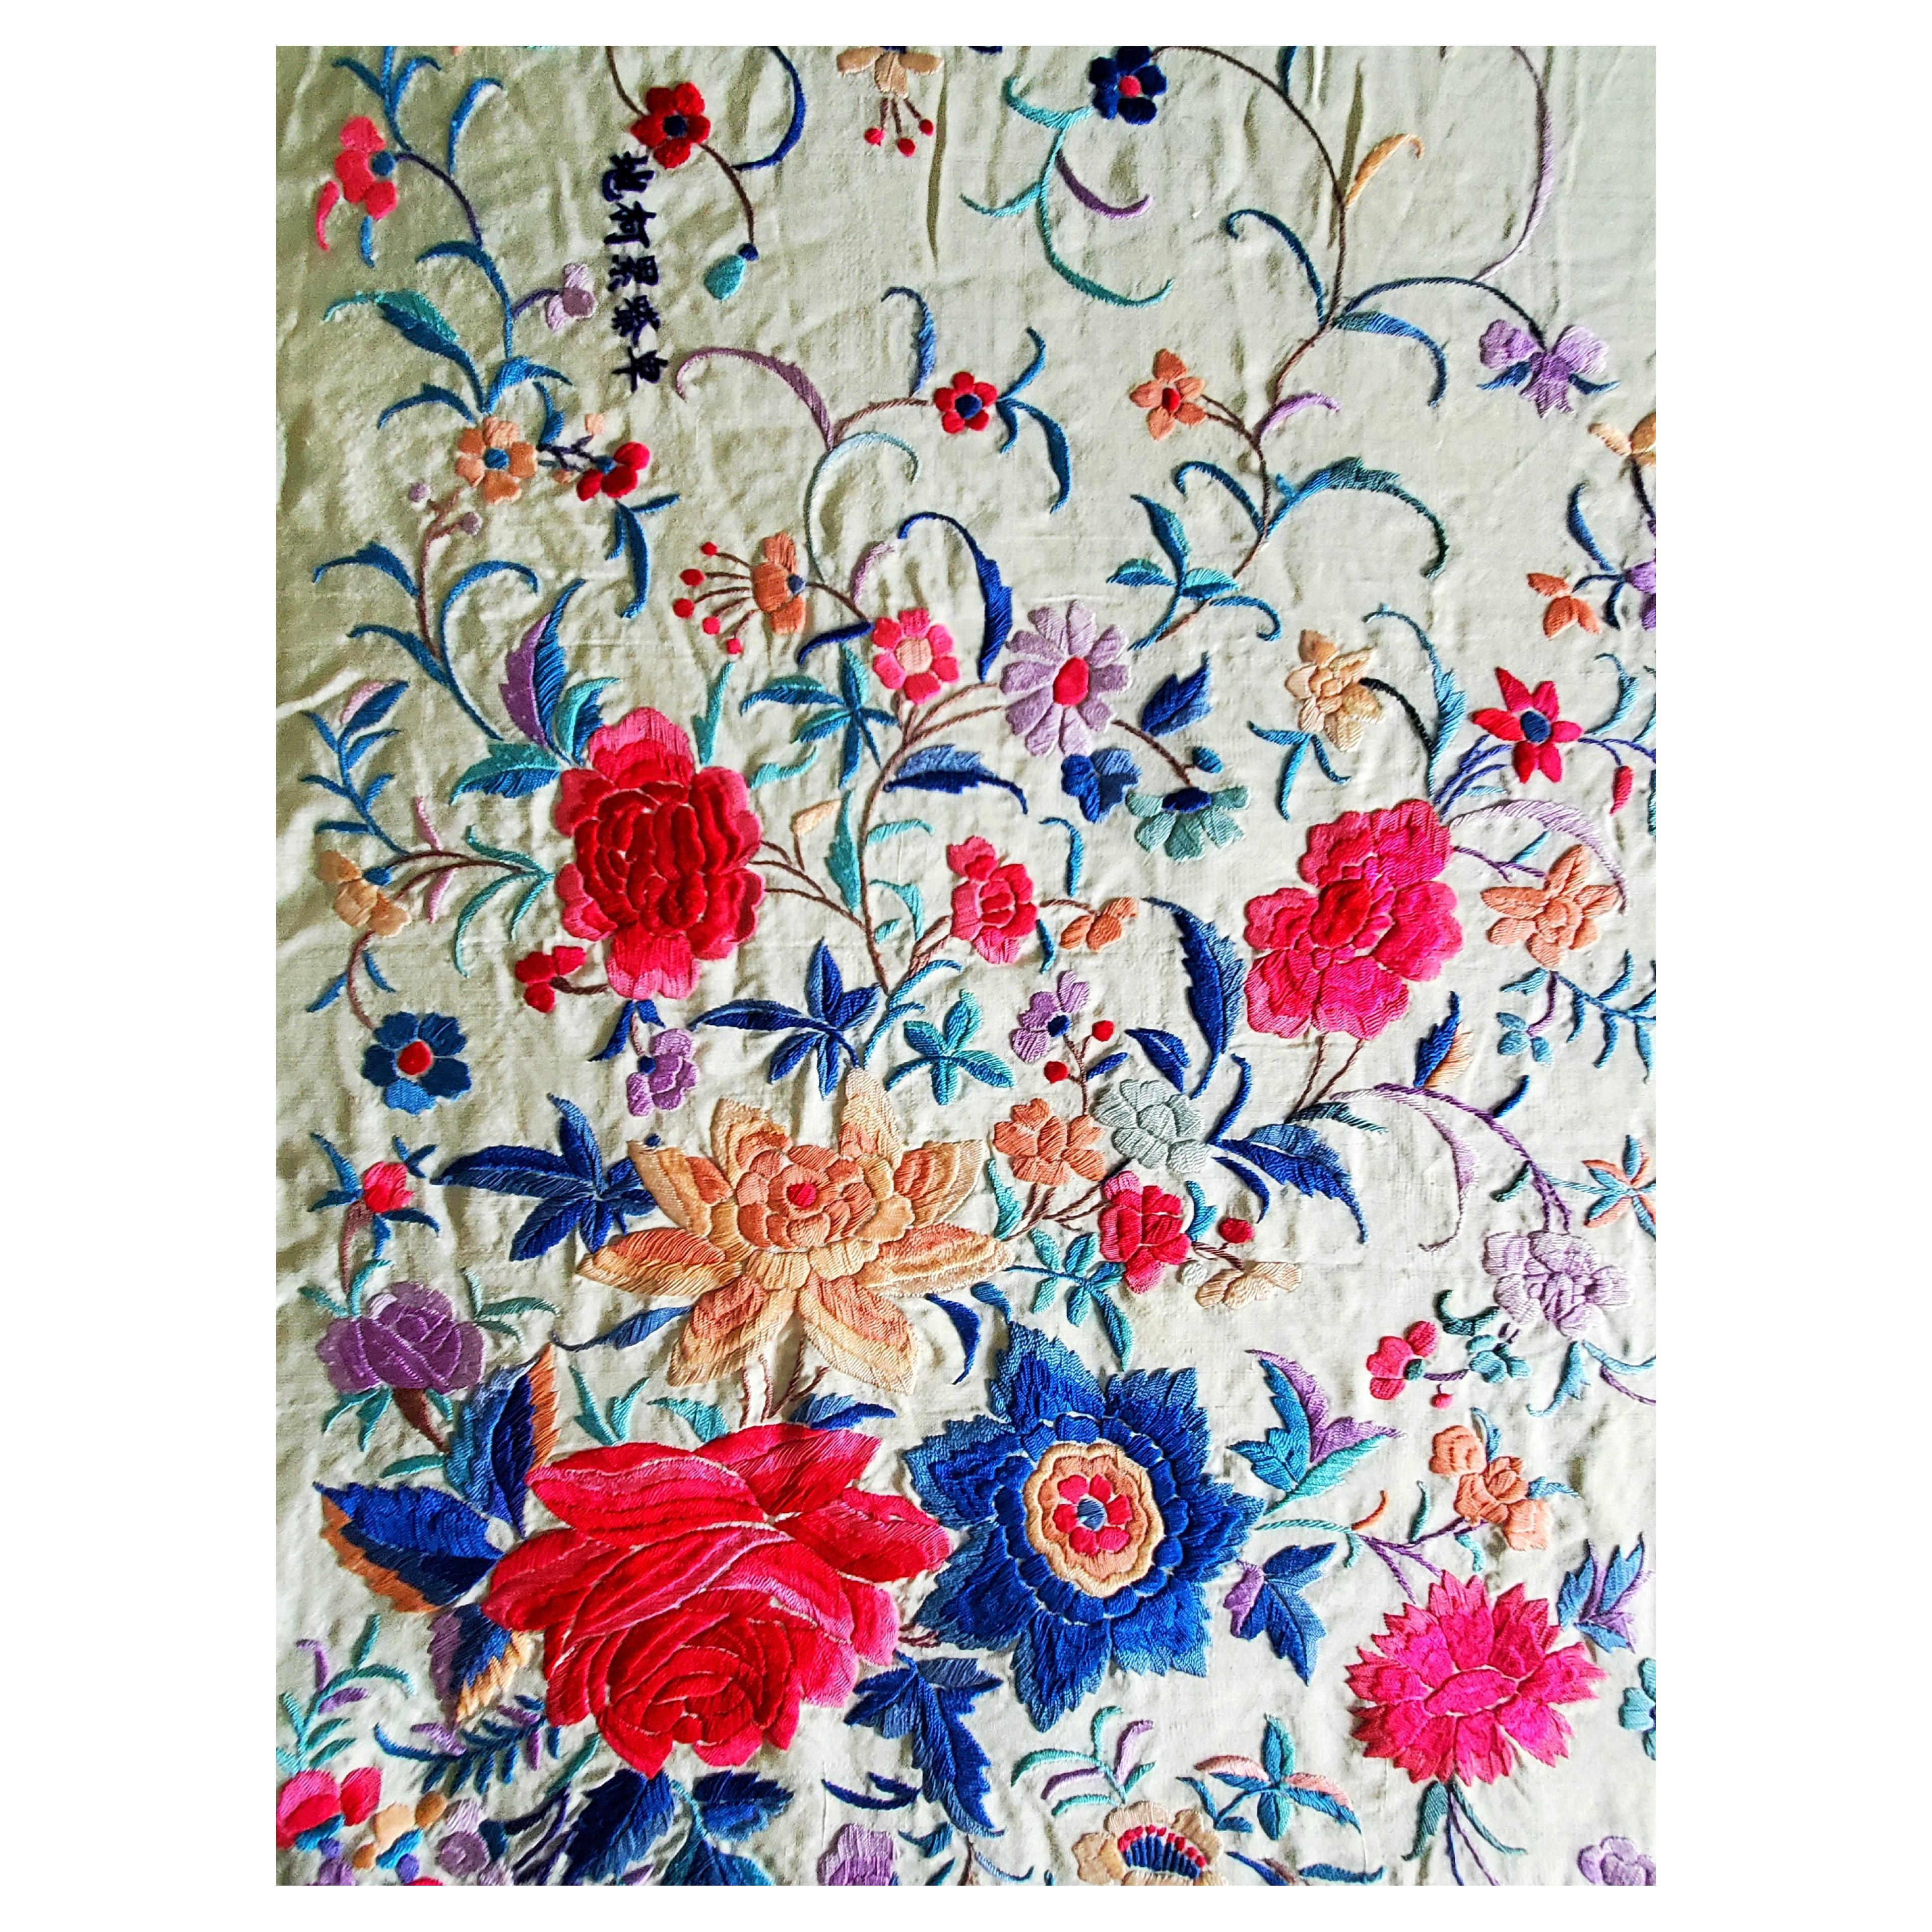 What a magnificent one-of-a-kind Valentine's Day gift this would be! Wow!!

This Chinese silk embroidered shawl is signed by the maker--a very rare find, indeed. This piece is also known as a Canton Manton de Manila or flamenco shawl. Hand